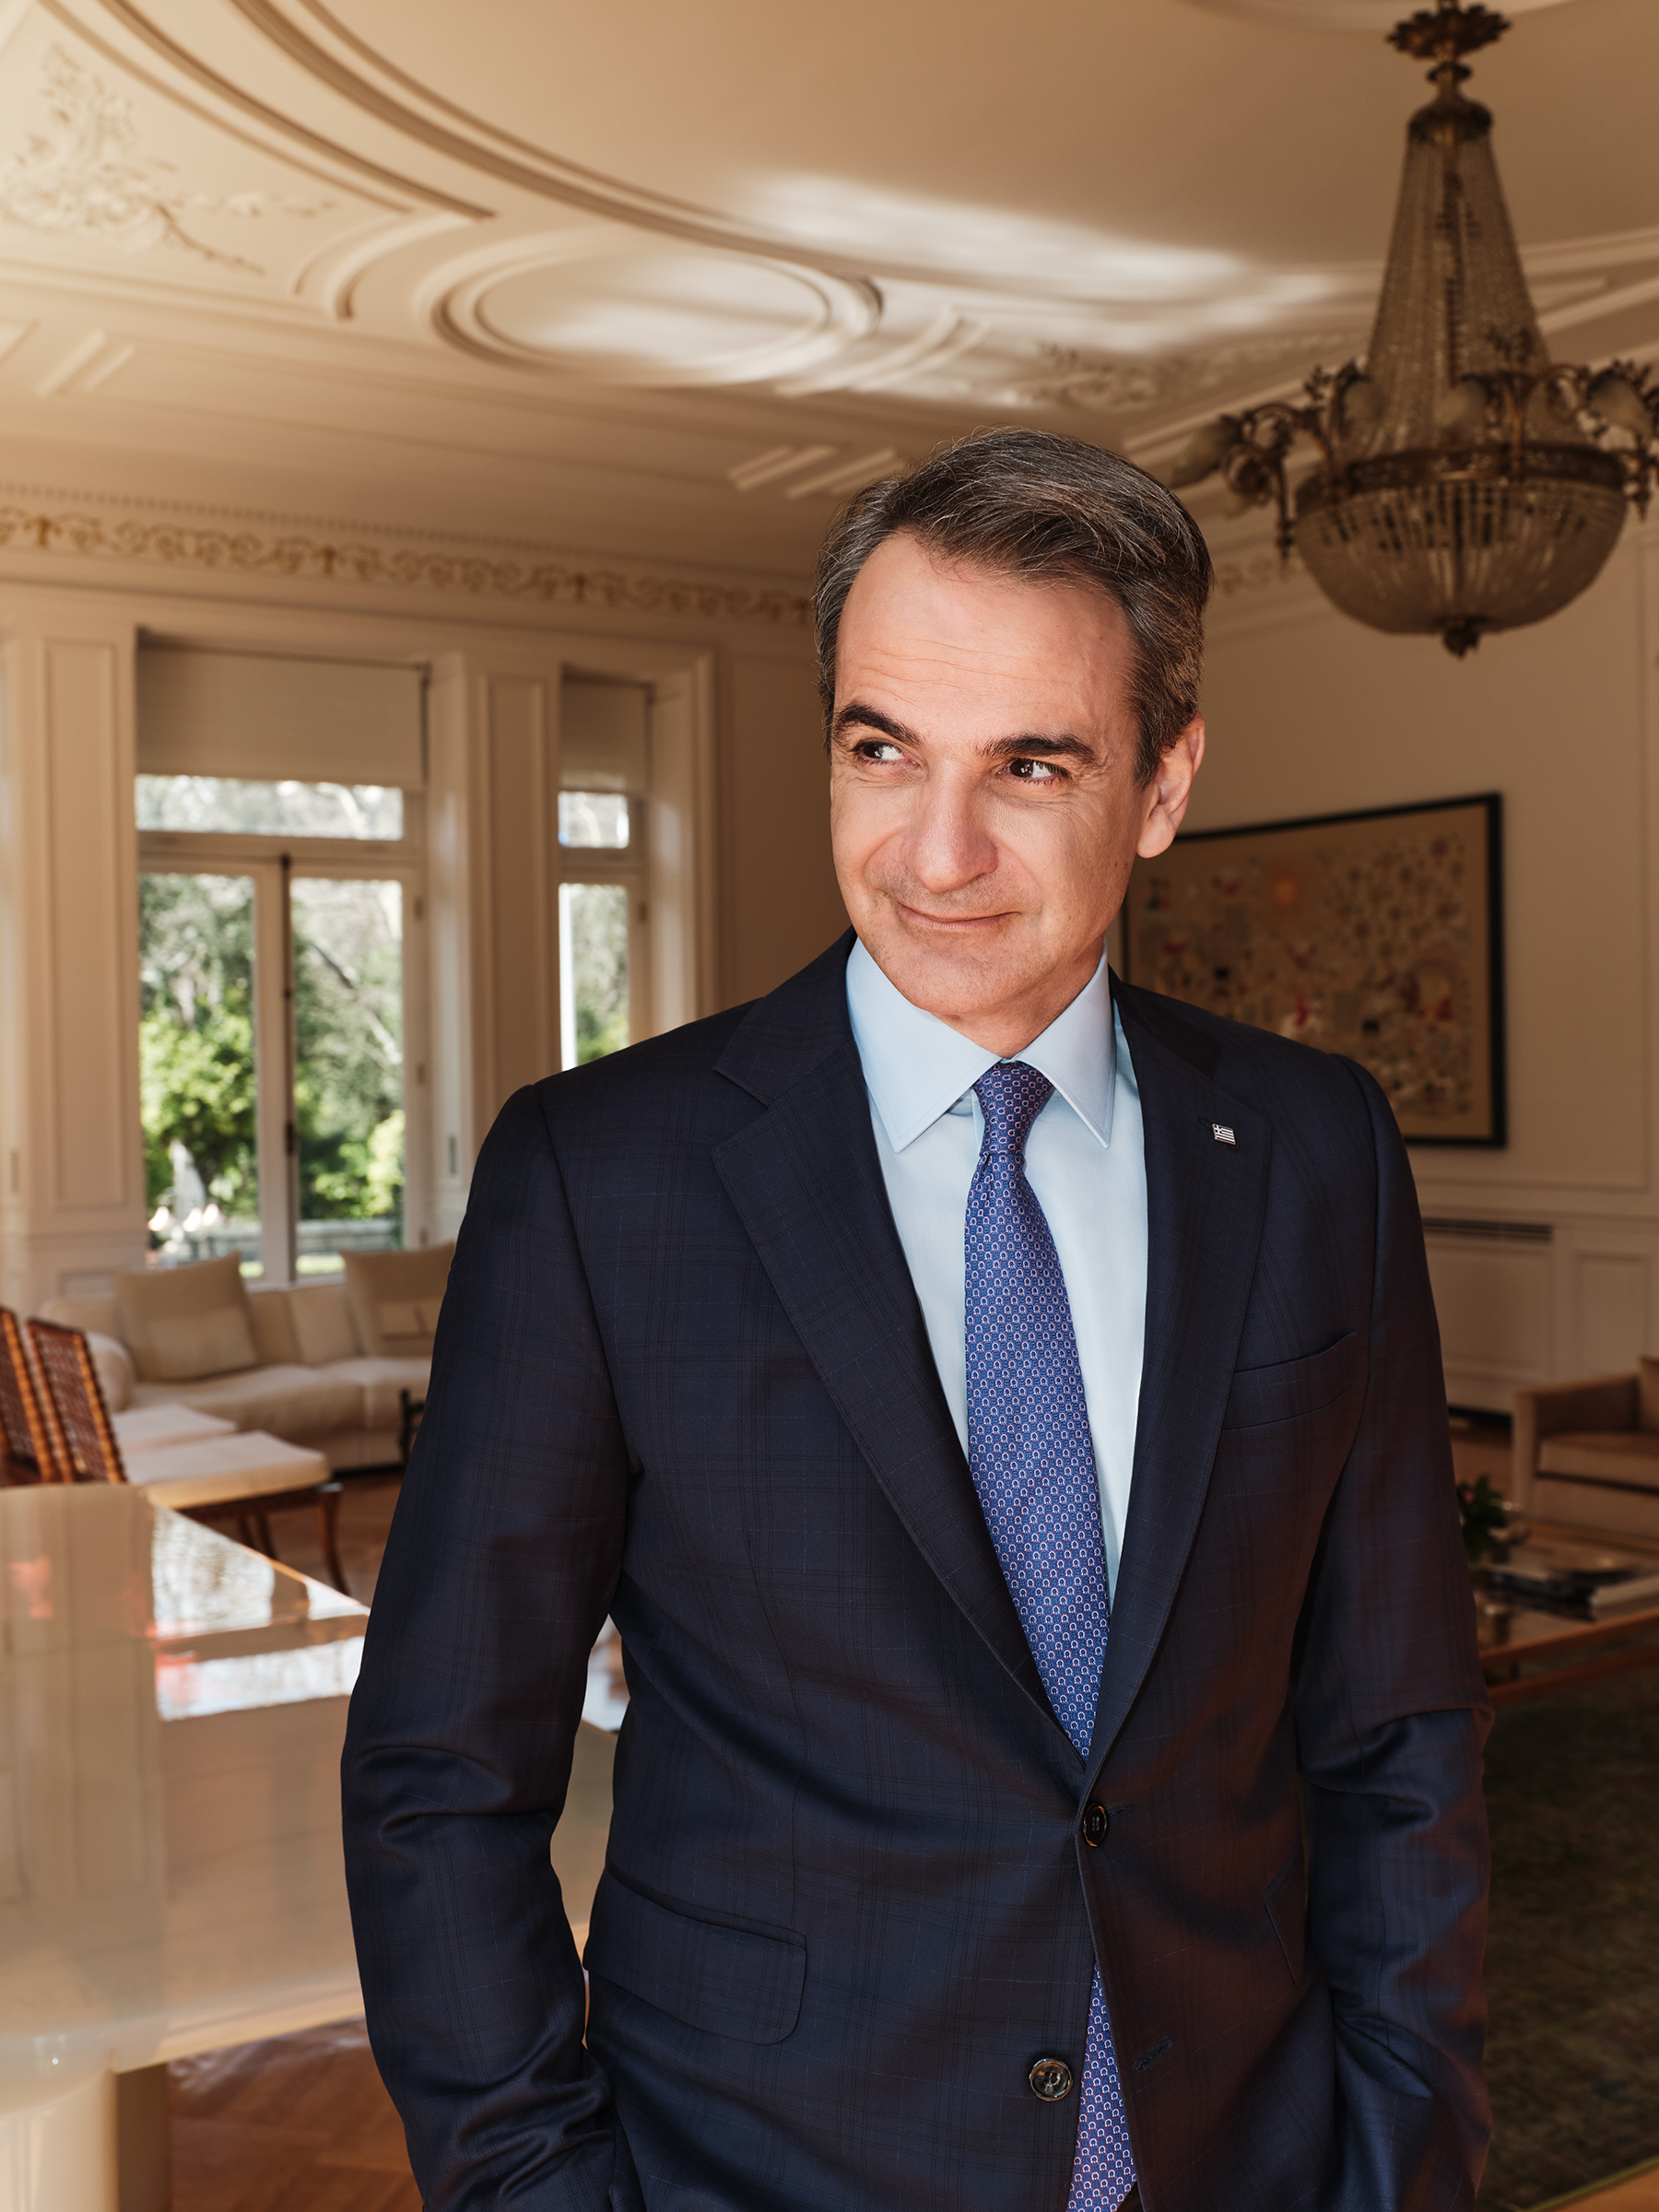 Kyriakos Mitsotakis poses for a portrait inside the reception room at the Maximos Mansion in Athens on March 12.